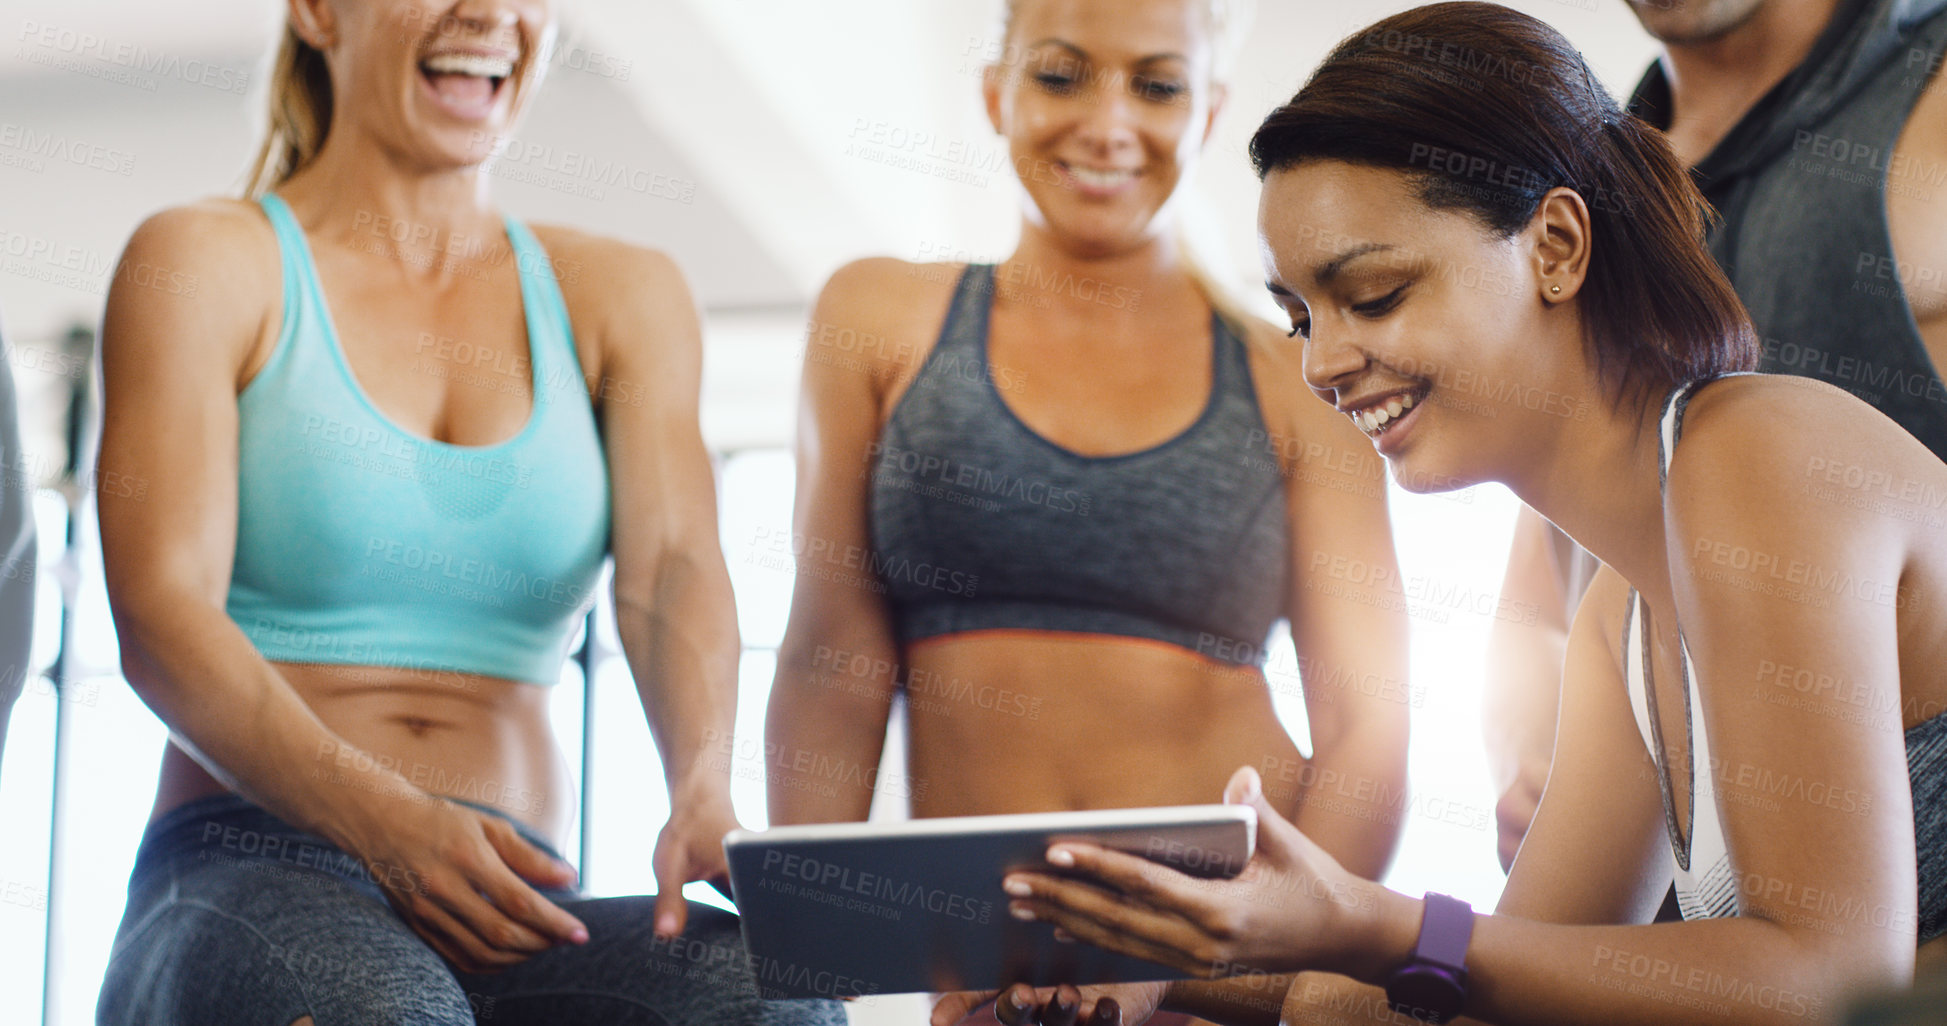 Buy stock photo Shot of a group of happy young women using a digital tablet together in a gym